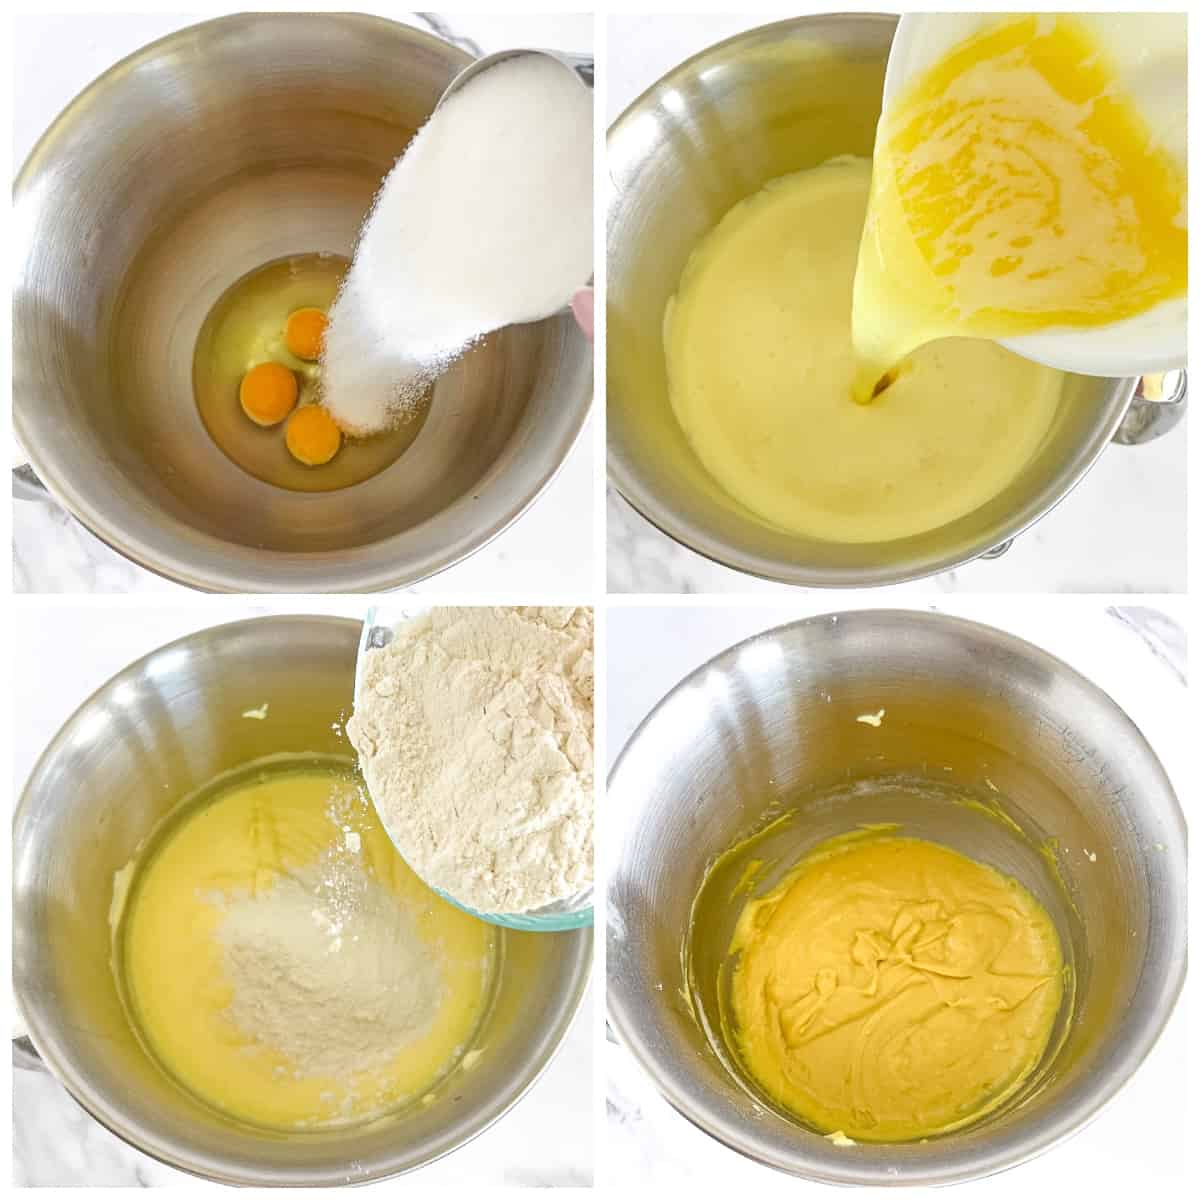 Gradually add in flour while mixing on low until everything is fully combined.